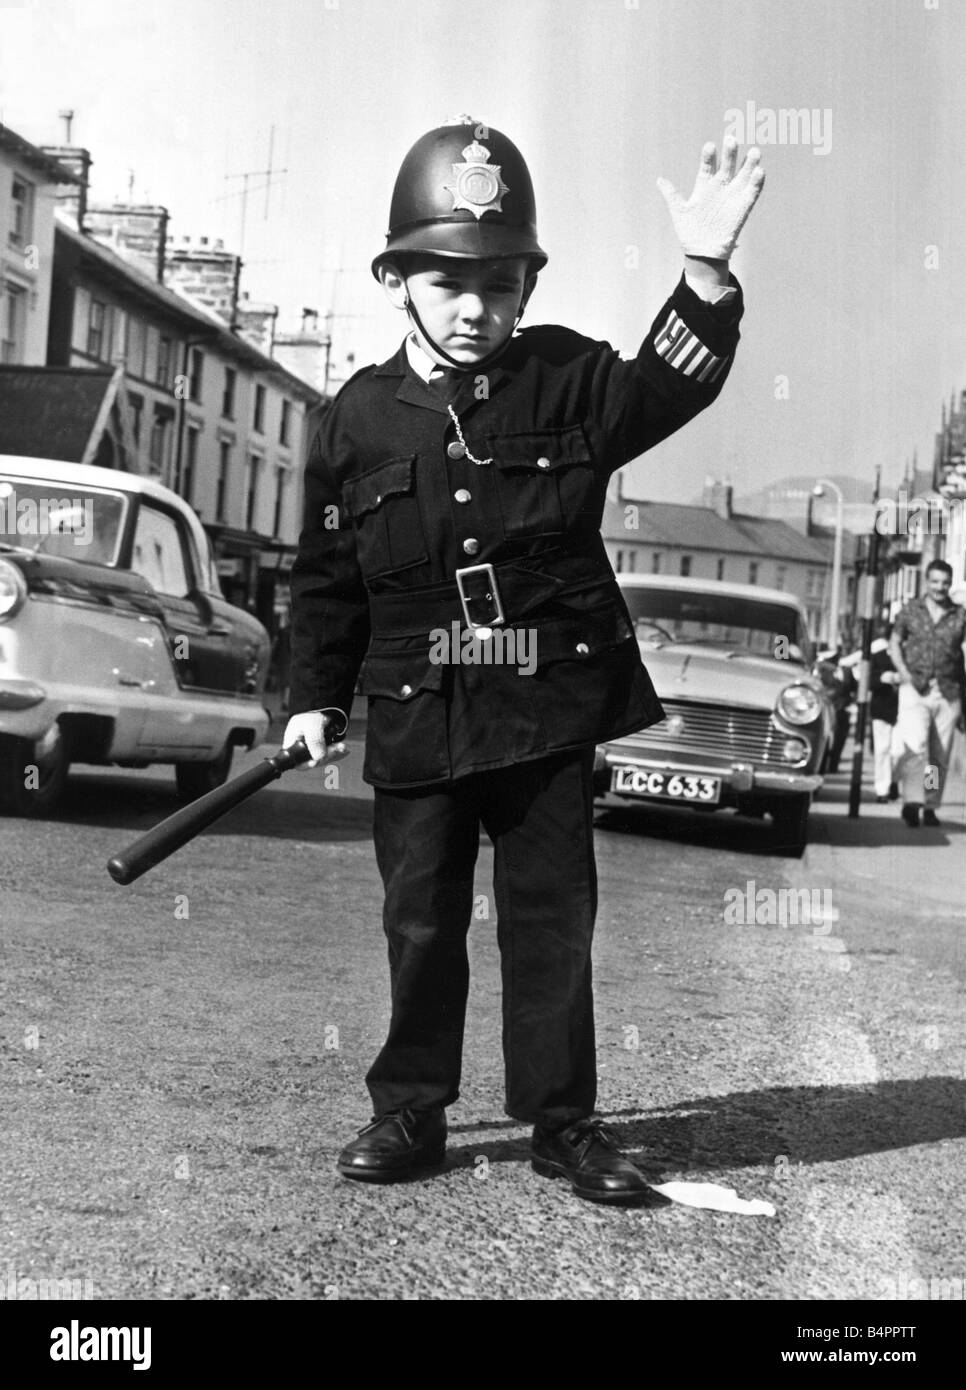 Clive Roberts of Portmadoo North Wales was given the uniform at Christmas and thinks being a policeman is wonderful Clive accompanies Special Constable Griff Lewis on traffic duty in the town s main street Octboer 1964 Stock Photo